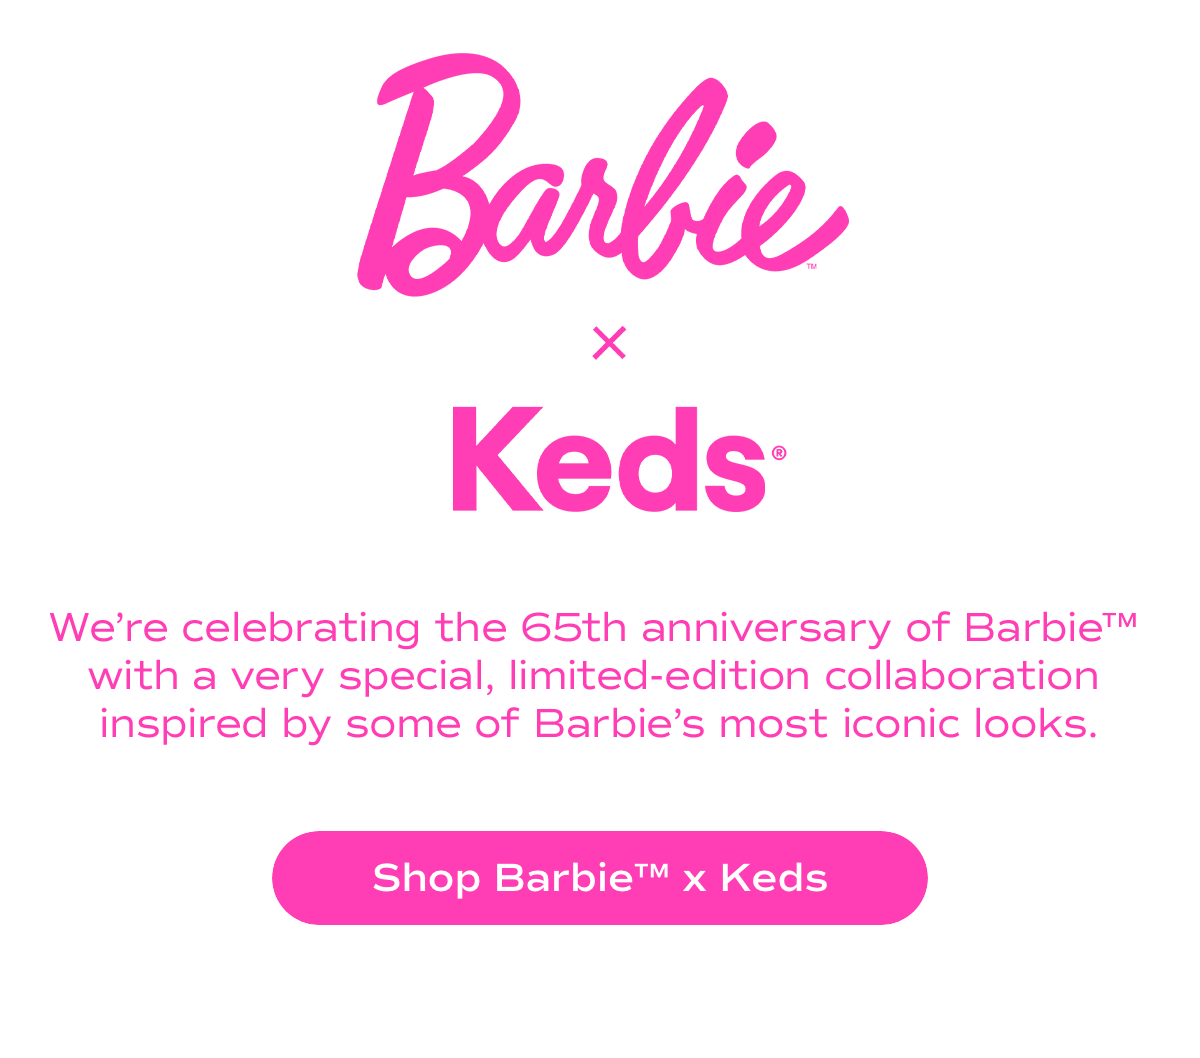 Barbie x Keds. Were celebrating the 65th anniversary of Barbie with a very special, limitededition collaboration inspired by some of Barbies most iconic looks. Shop Barbie x Keds